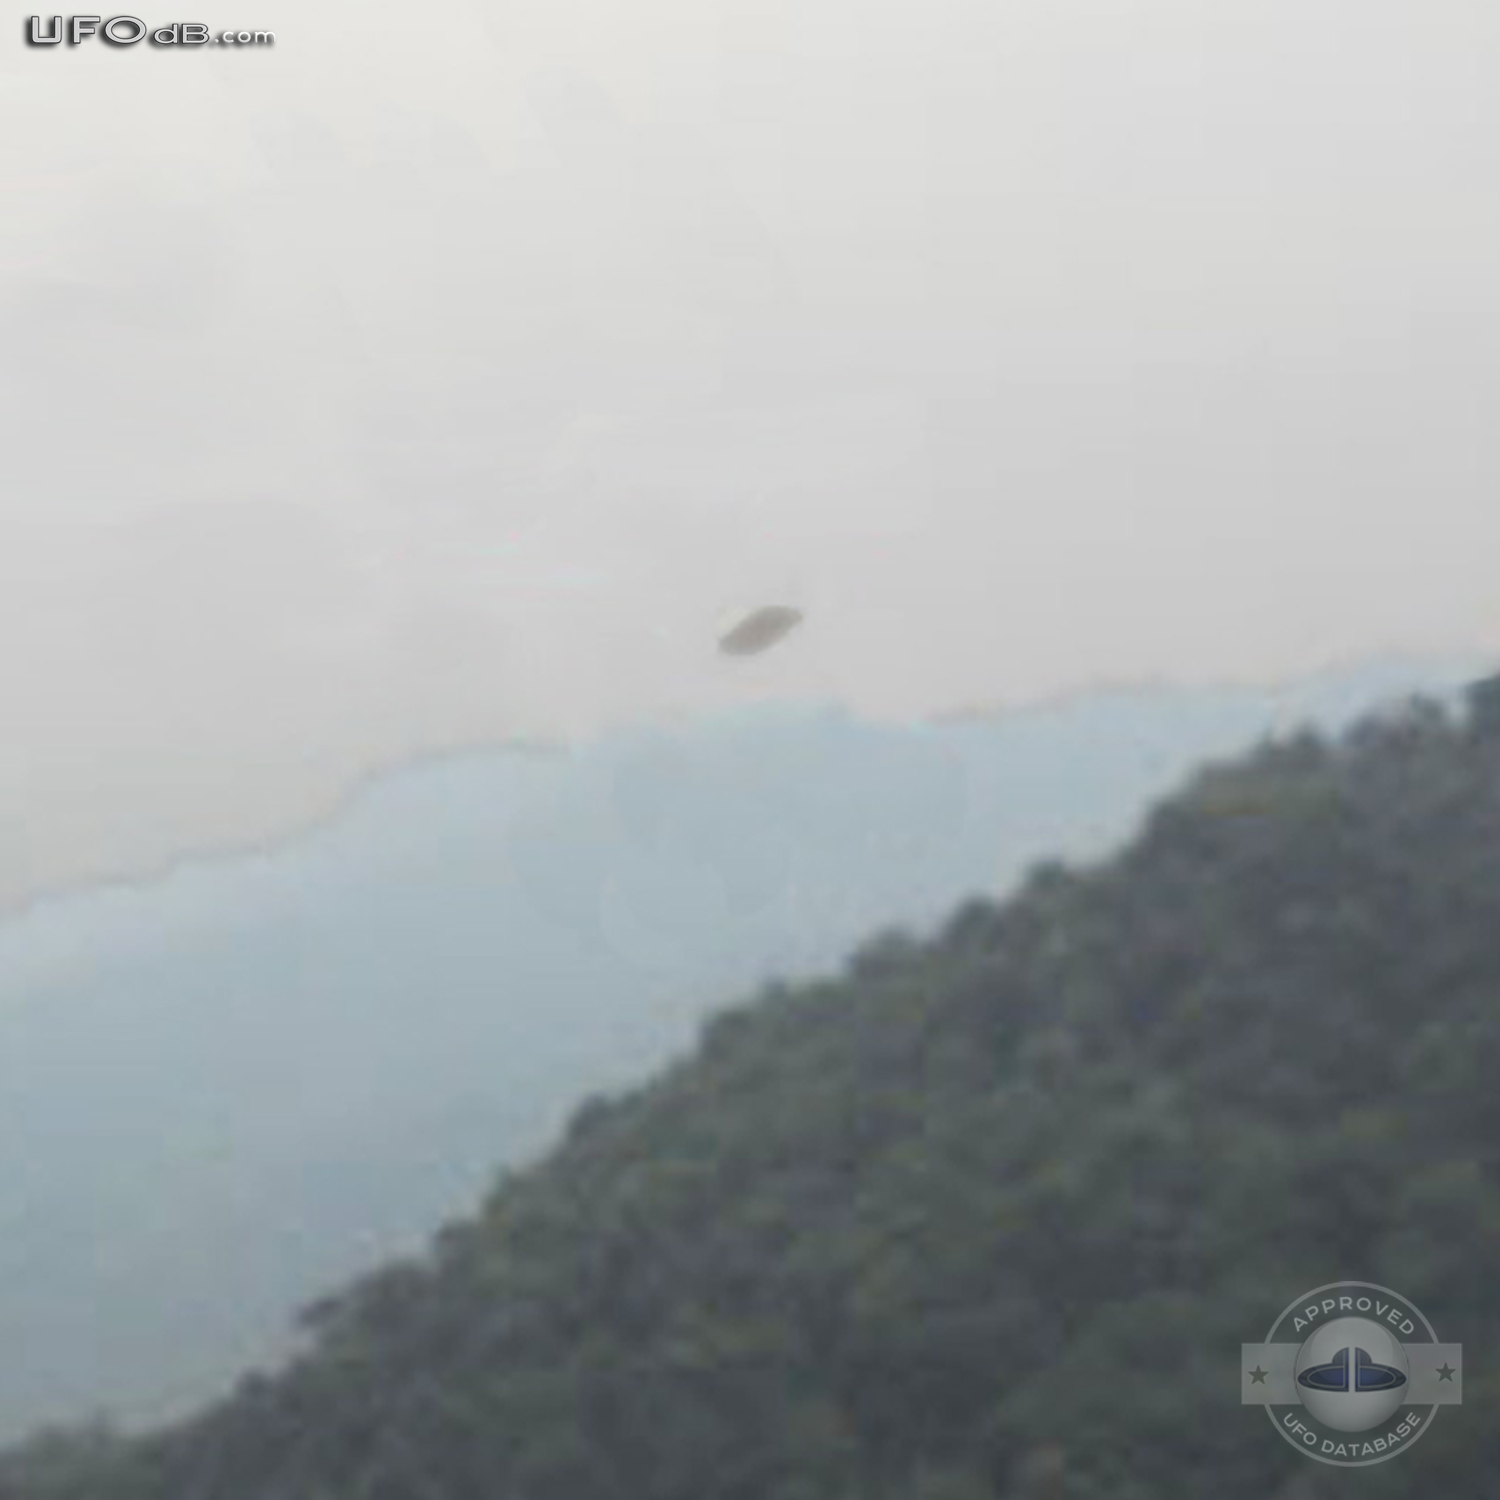 Humming whirring sounds heard with UFO picture | Hangzhou | April 2011 UFO Picture #332-4